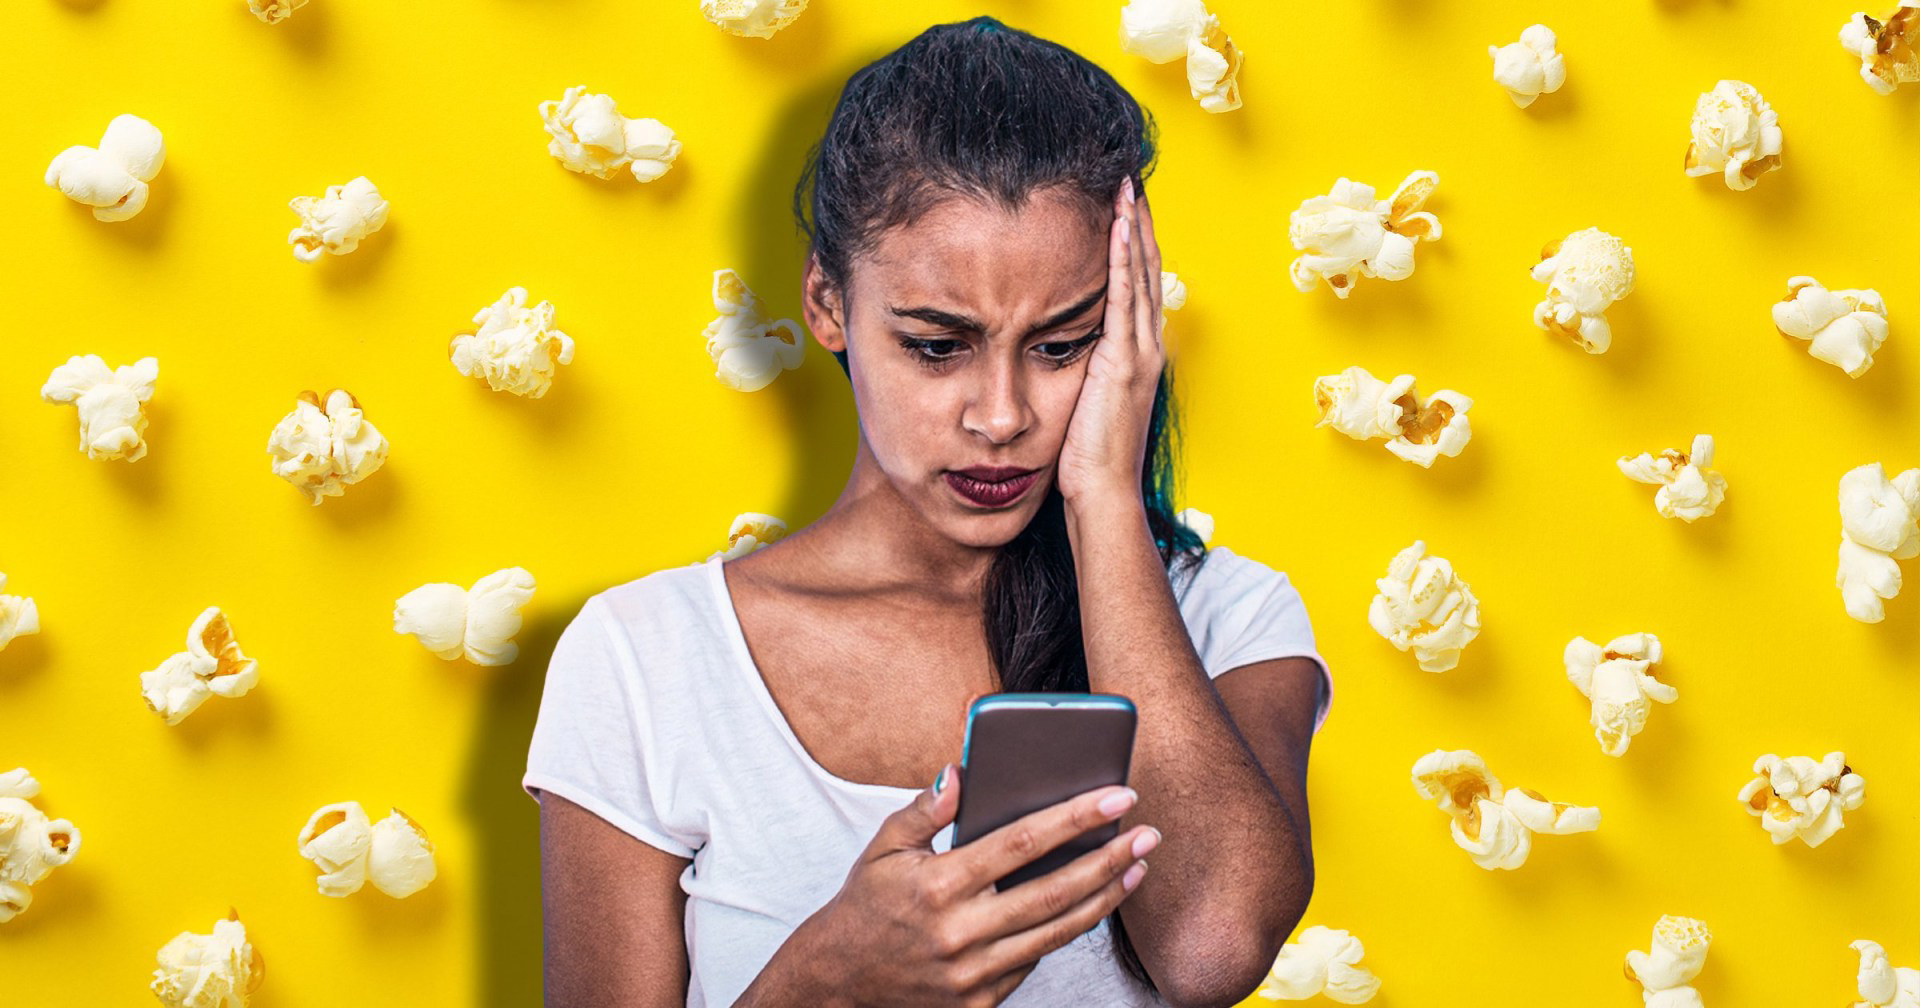 Popcorn brain' could be behind our dwindling attention spans